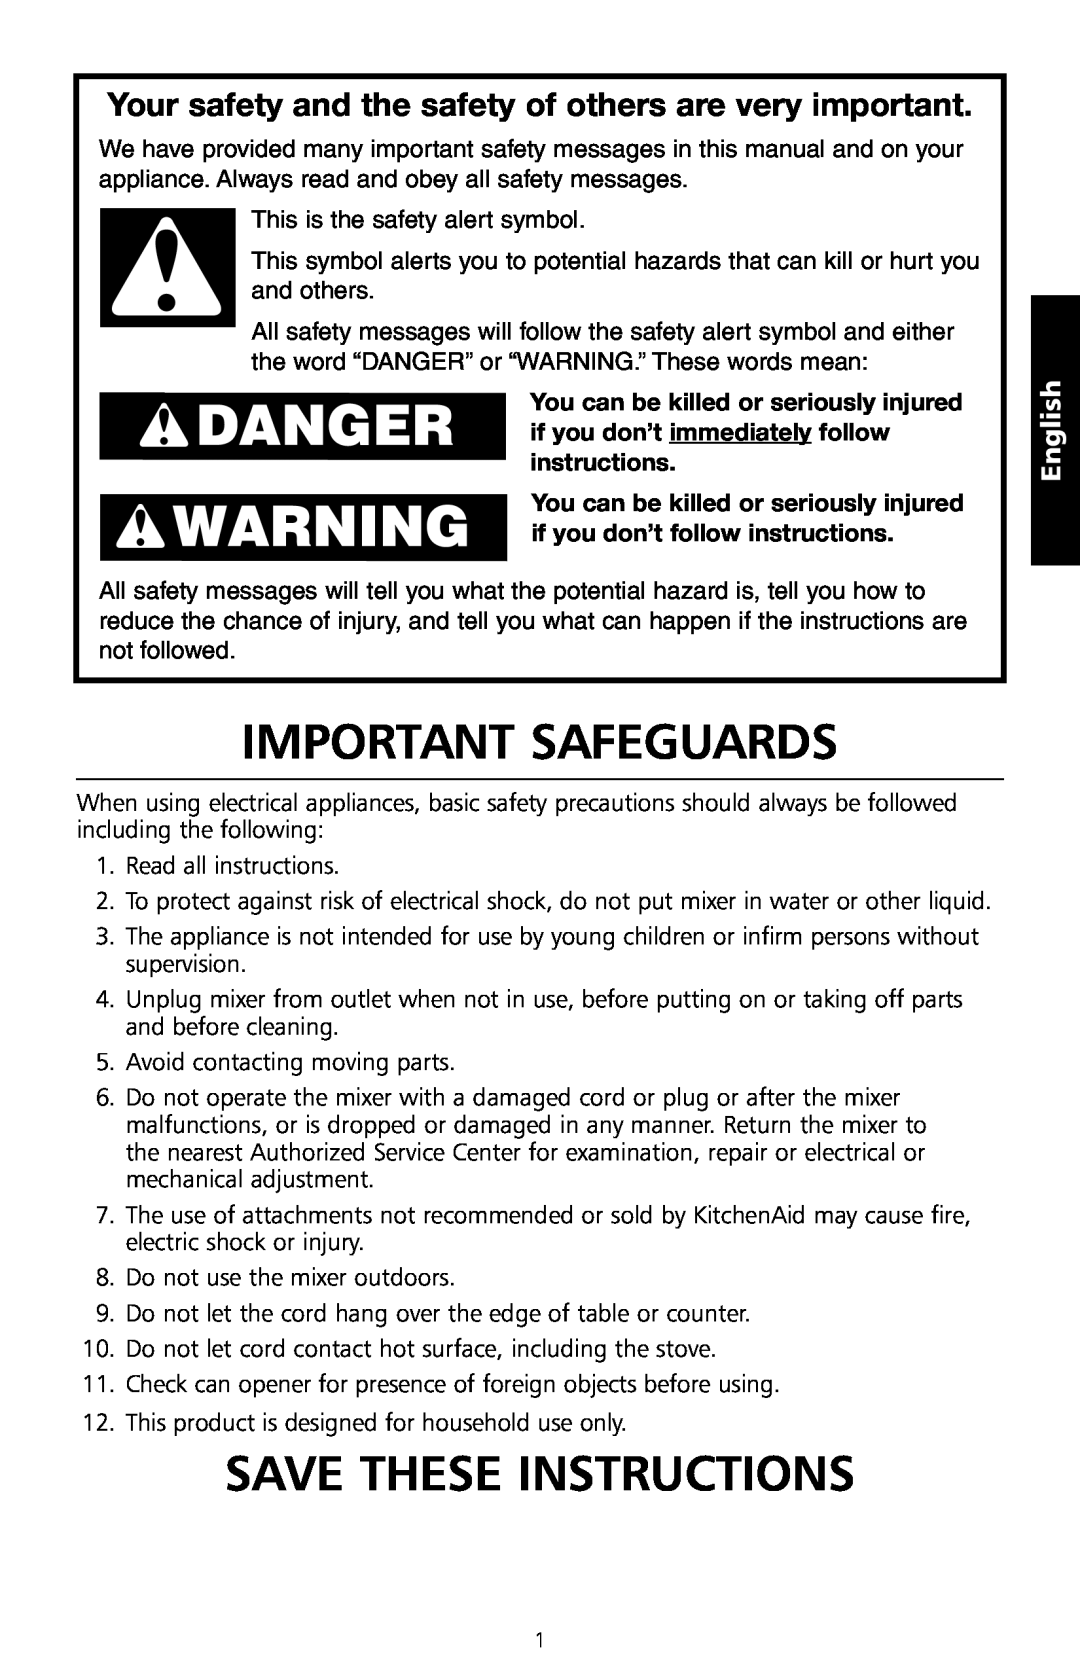 KitchenAid 5CO Important Safeguards, Save These Instructions, Your safety and the safety of others are very important 